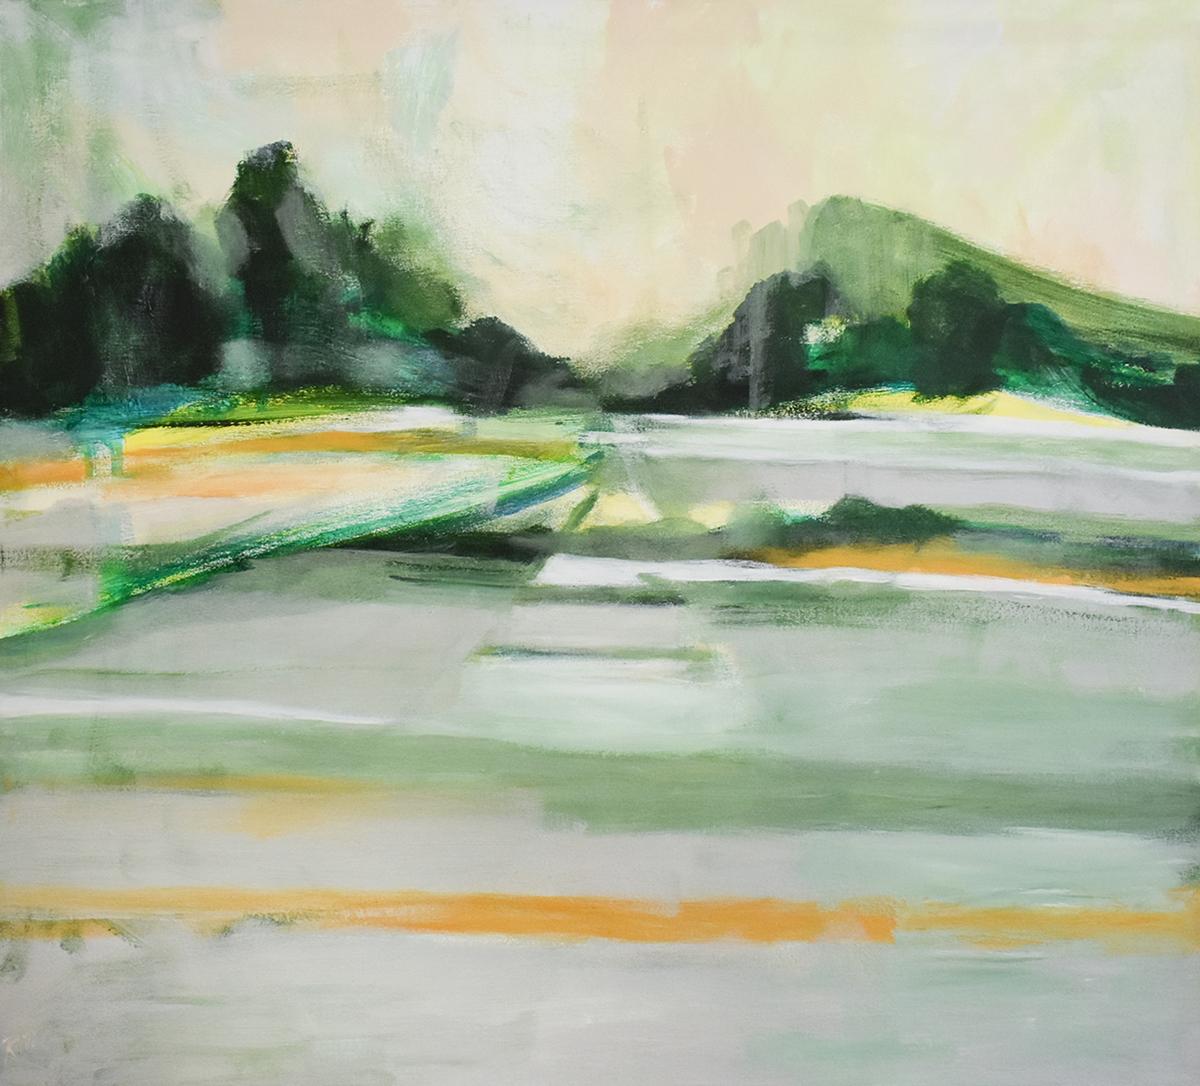 Morning Haying: Contemporary Abstracted Landscape Painting of Green Summer Field